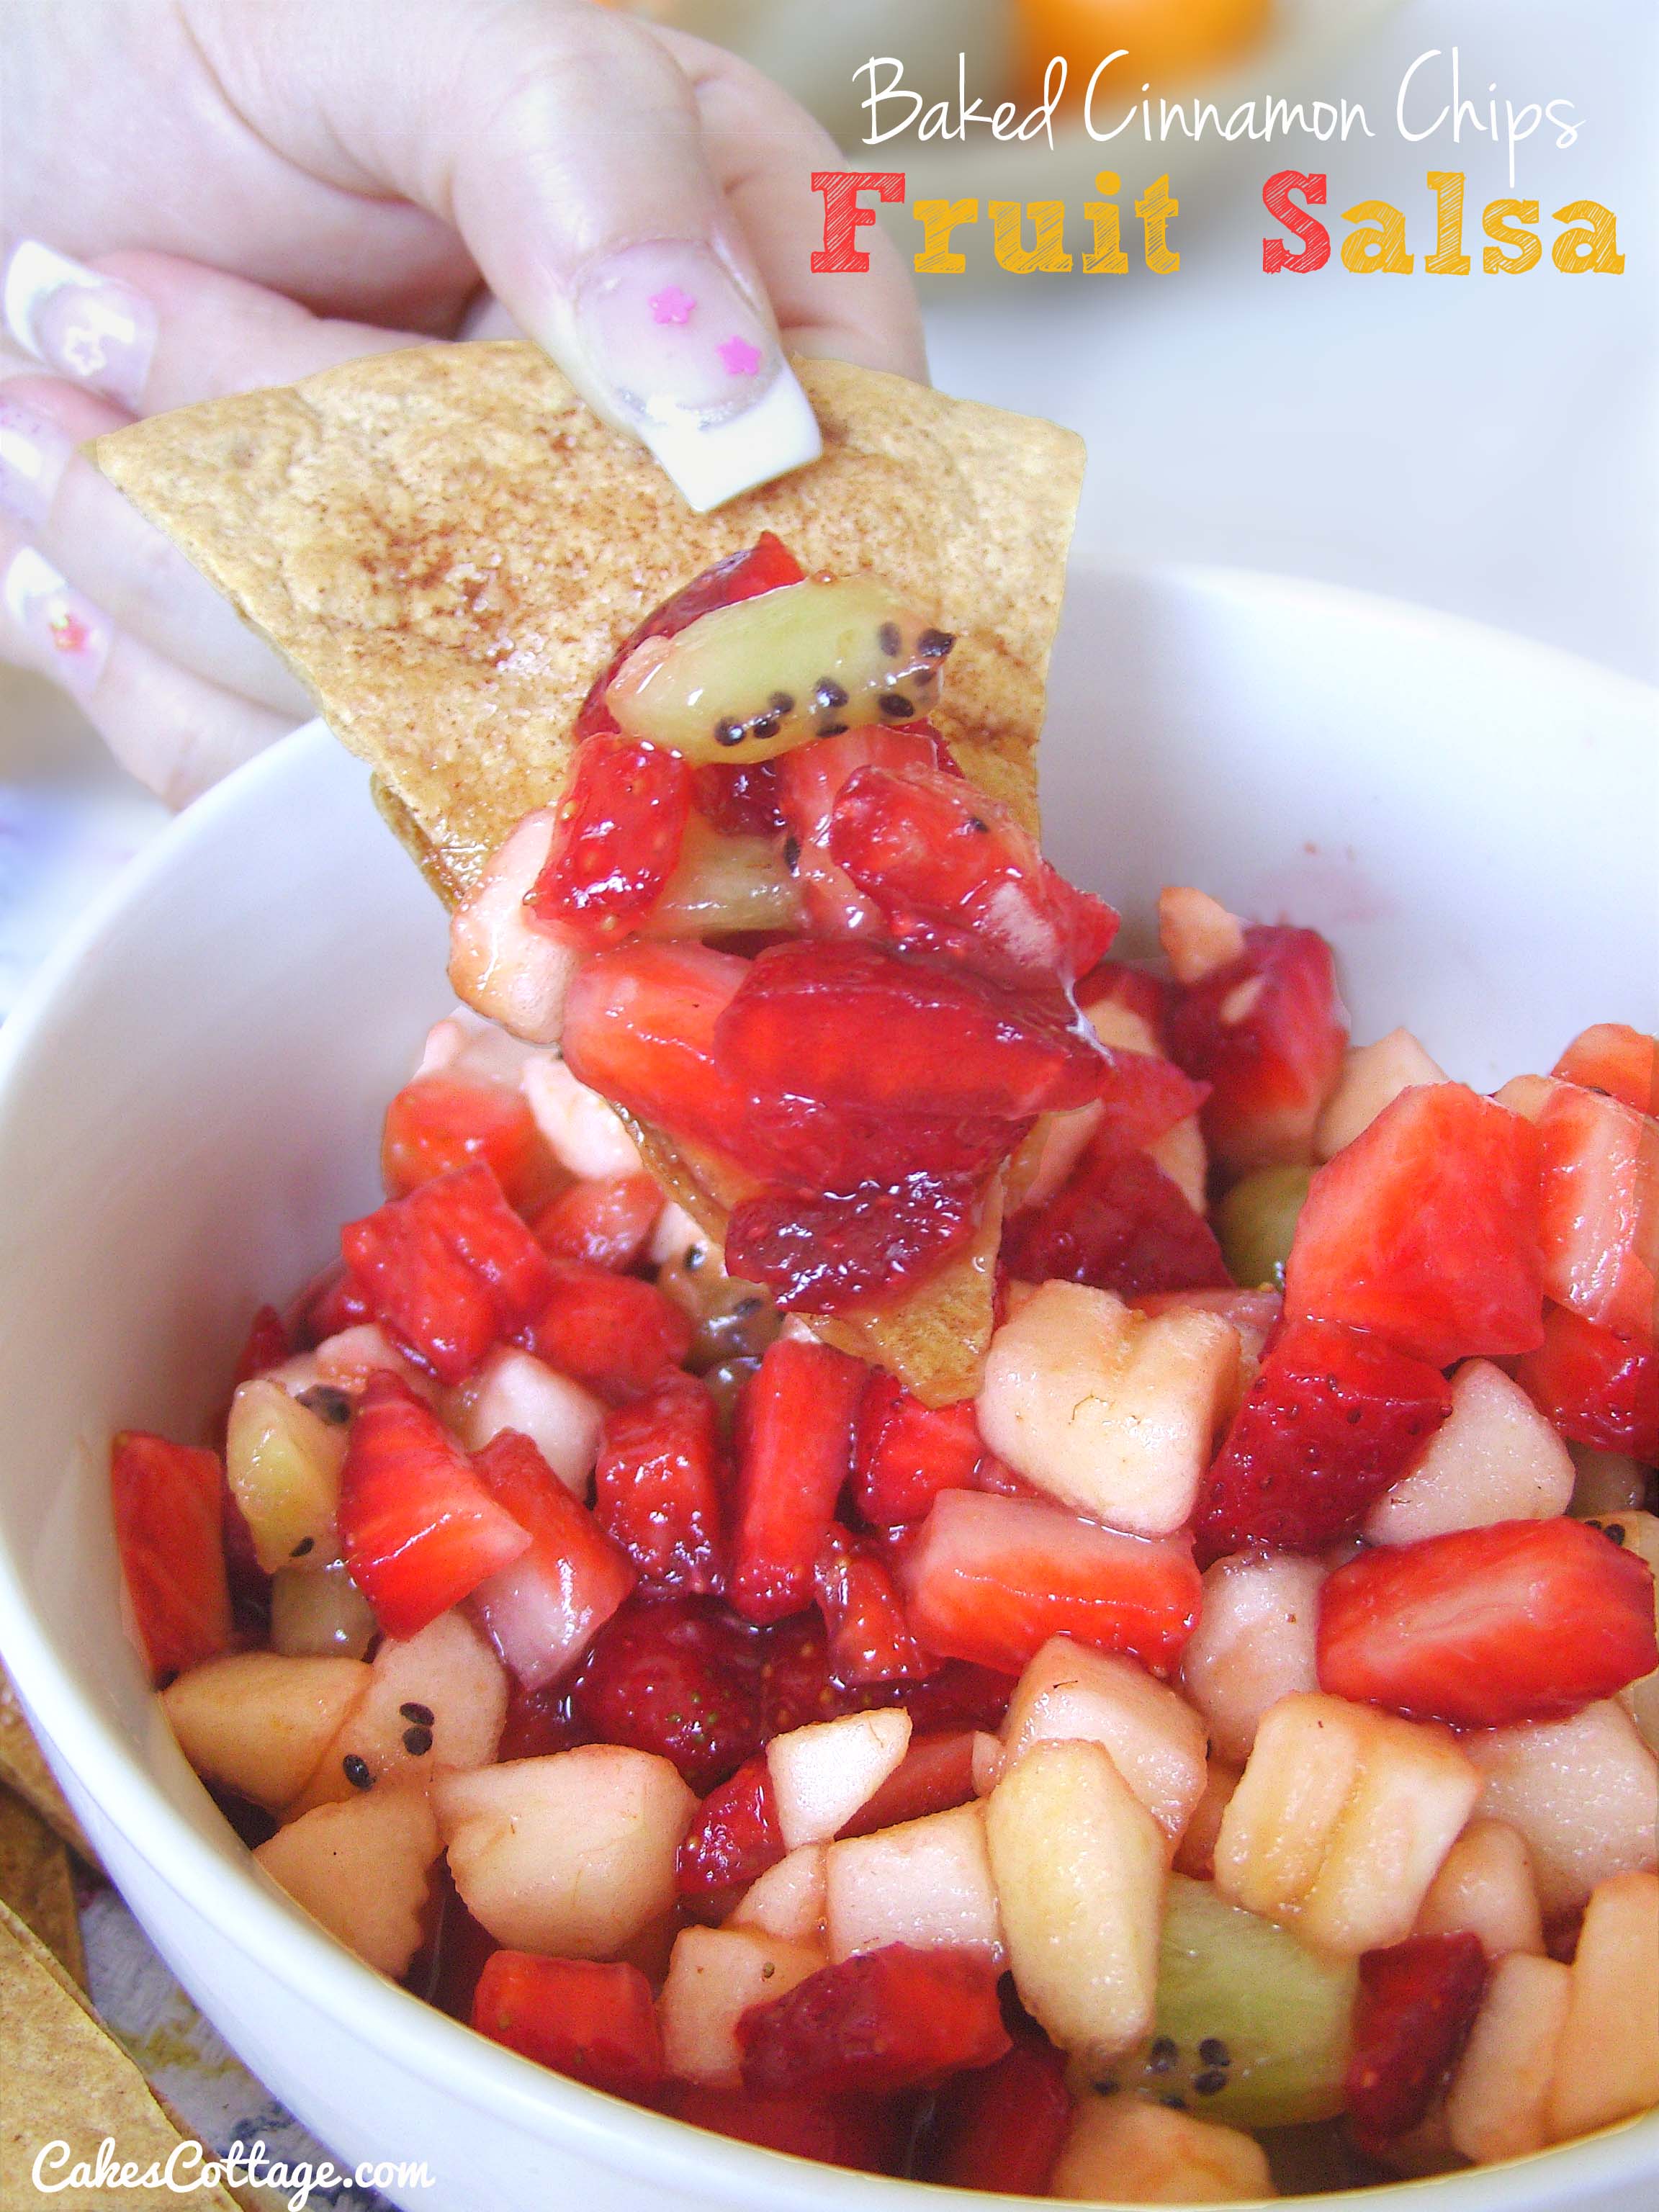 Who’s ready for Summer?!  Fresh fruit drizzled with sweet jam served with buttery, cinnamon chips, fragrant from the oven…